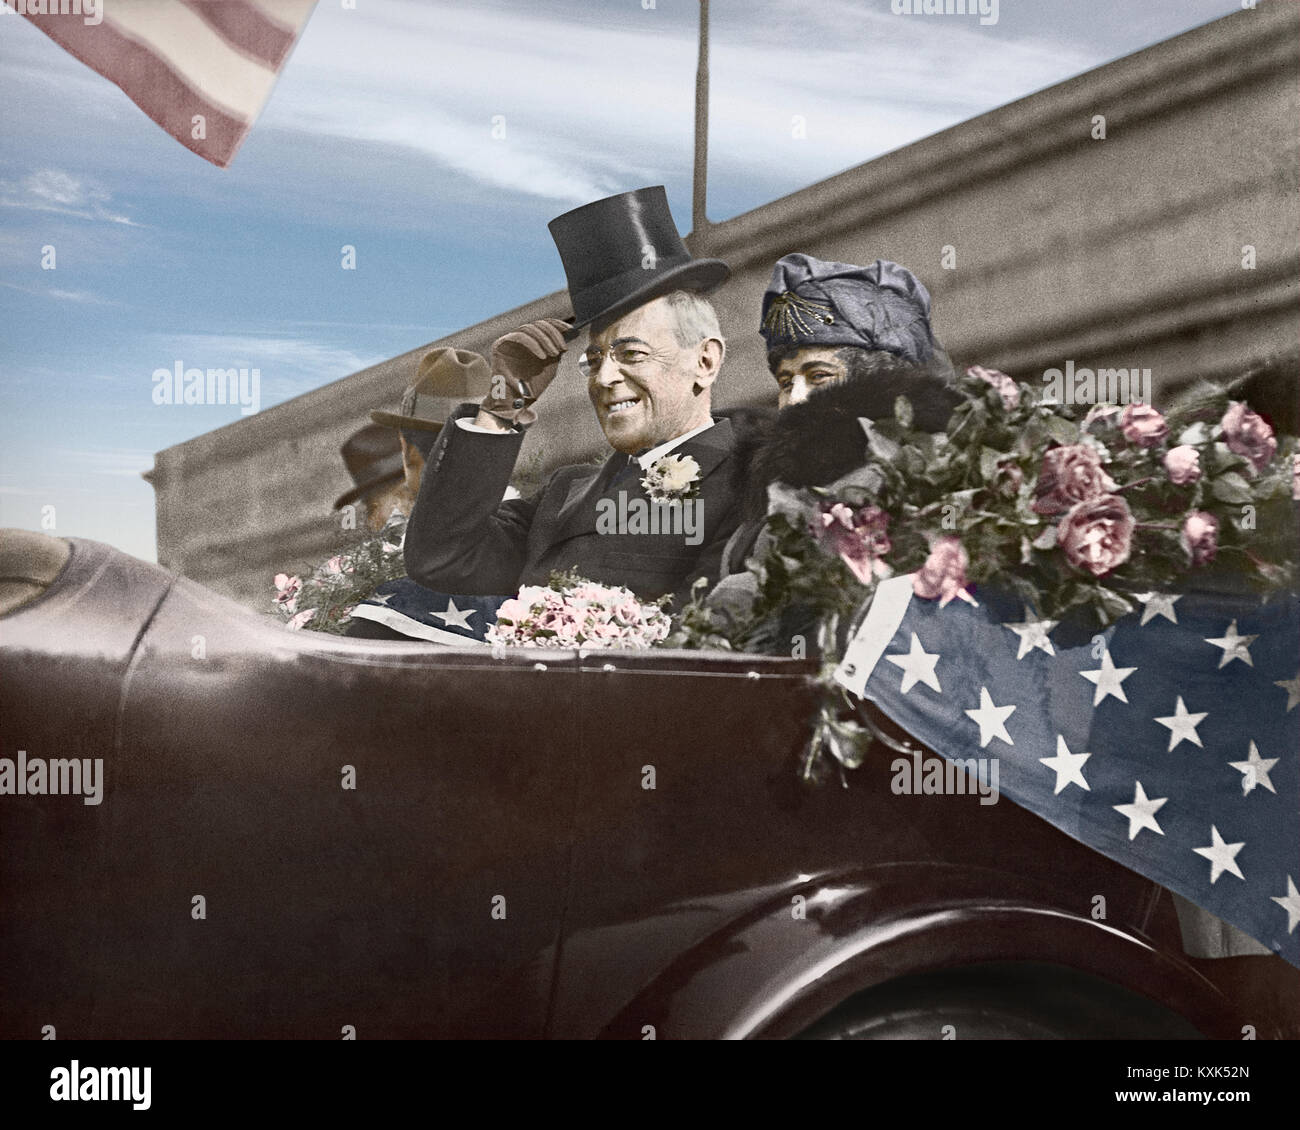 President Woodrow Wilson and his wife Edith in an open parade car on tour seeking support of the League of Nations. September 1919. Image colorized from original camera 5 x7 inch glass negative. Stock Photo